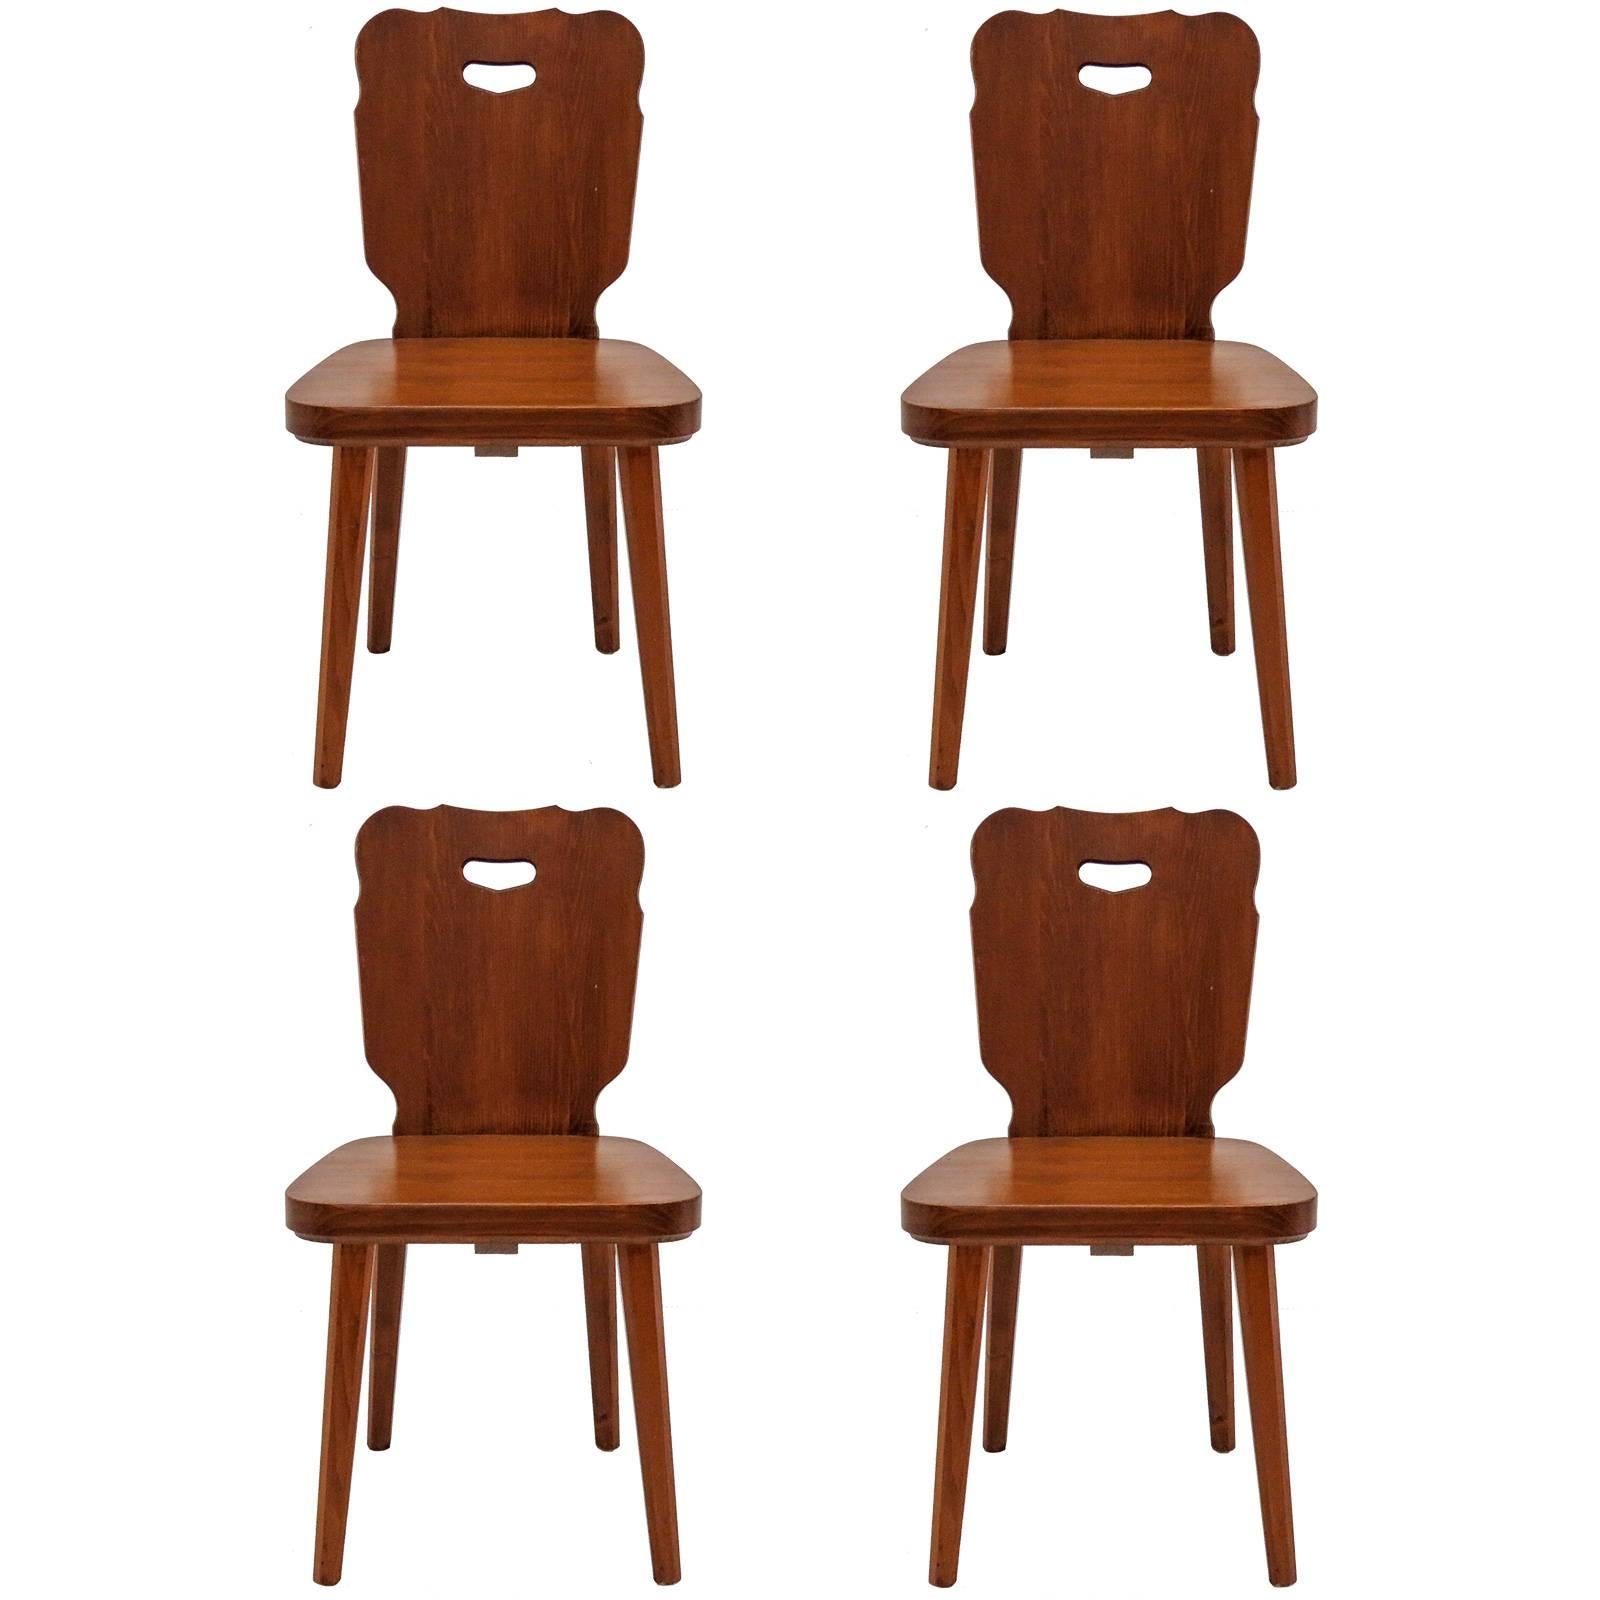 Set of Four Rustic Wooden Chairs